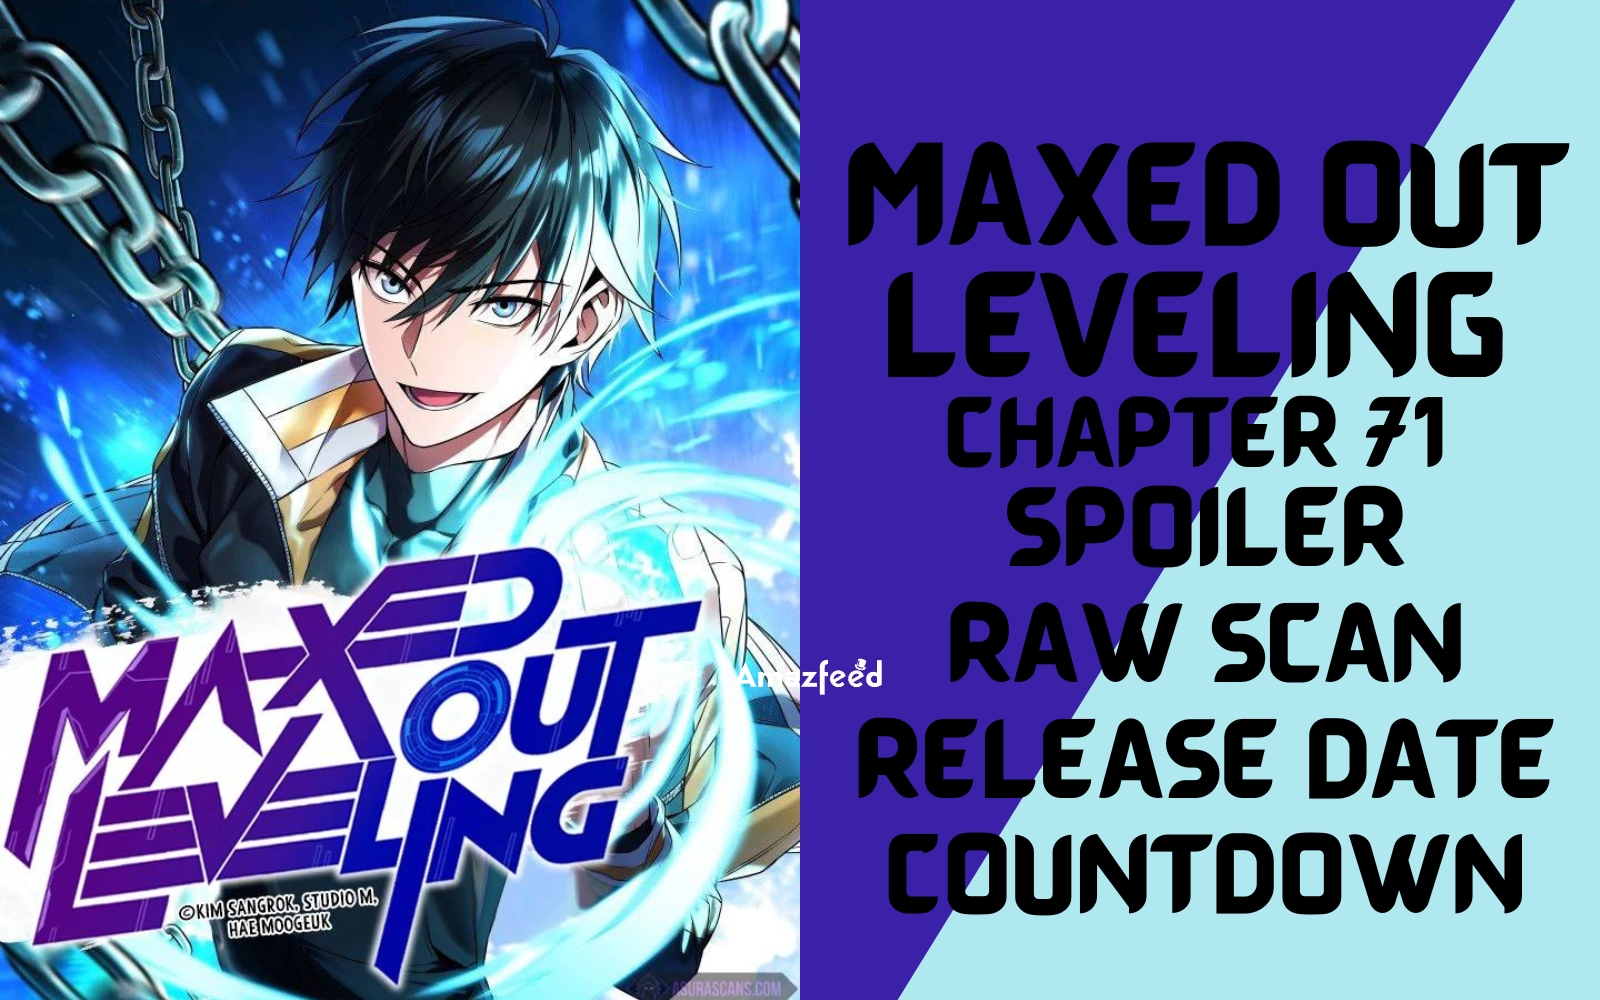 Maxed Out Leveling Chapter 71 Spoiler, Raw Scan, Plot, Color Page, Release Date